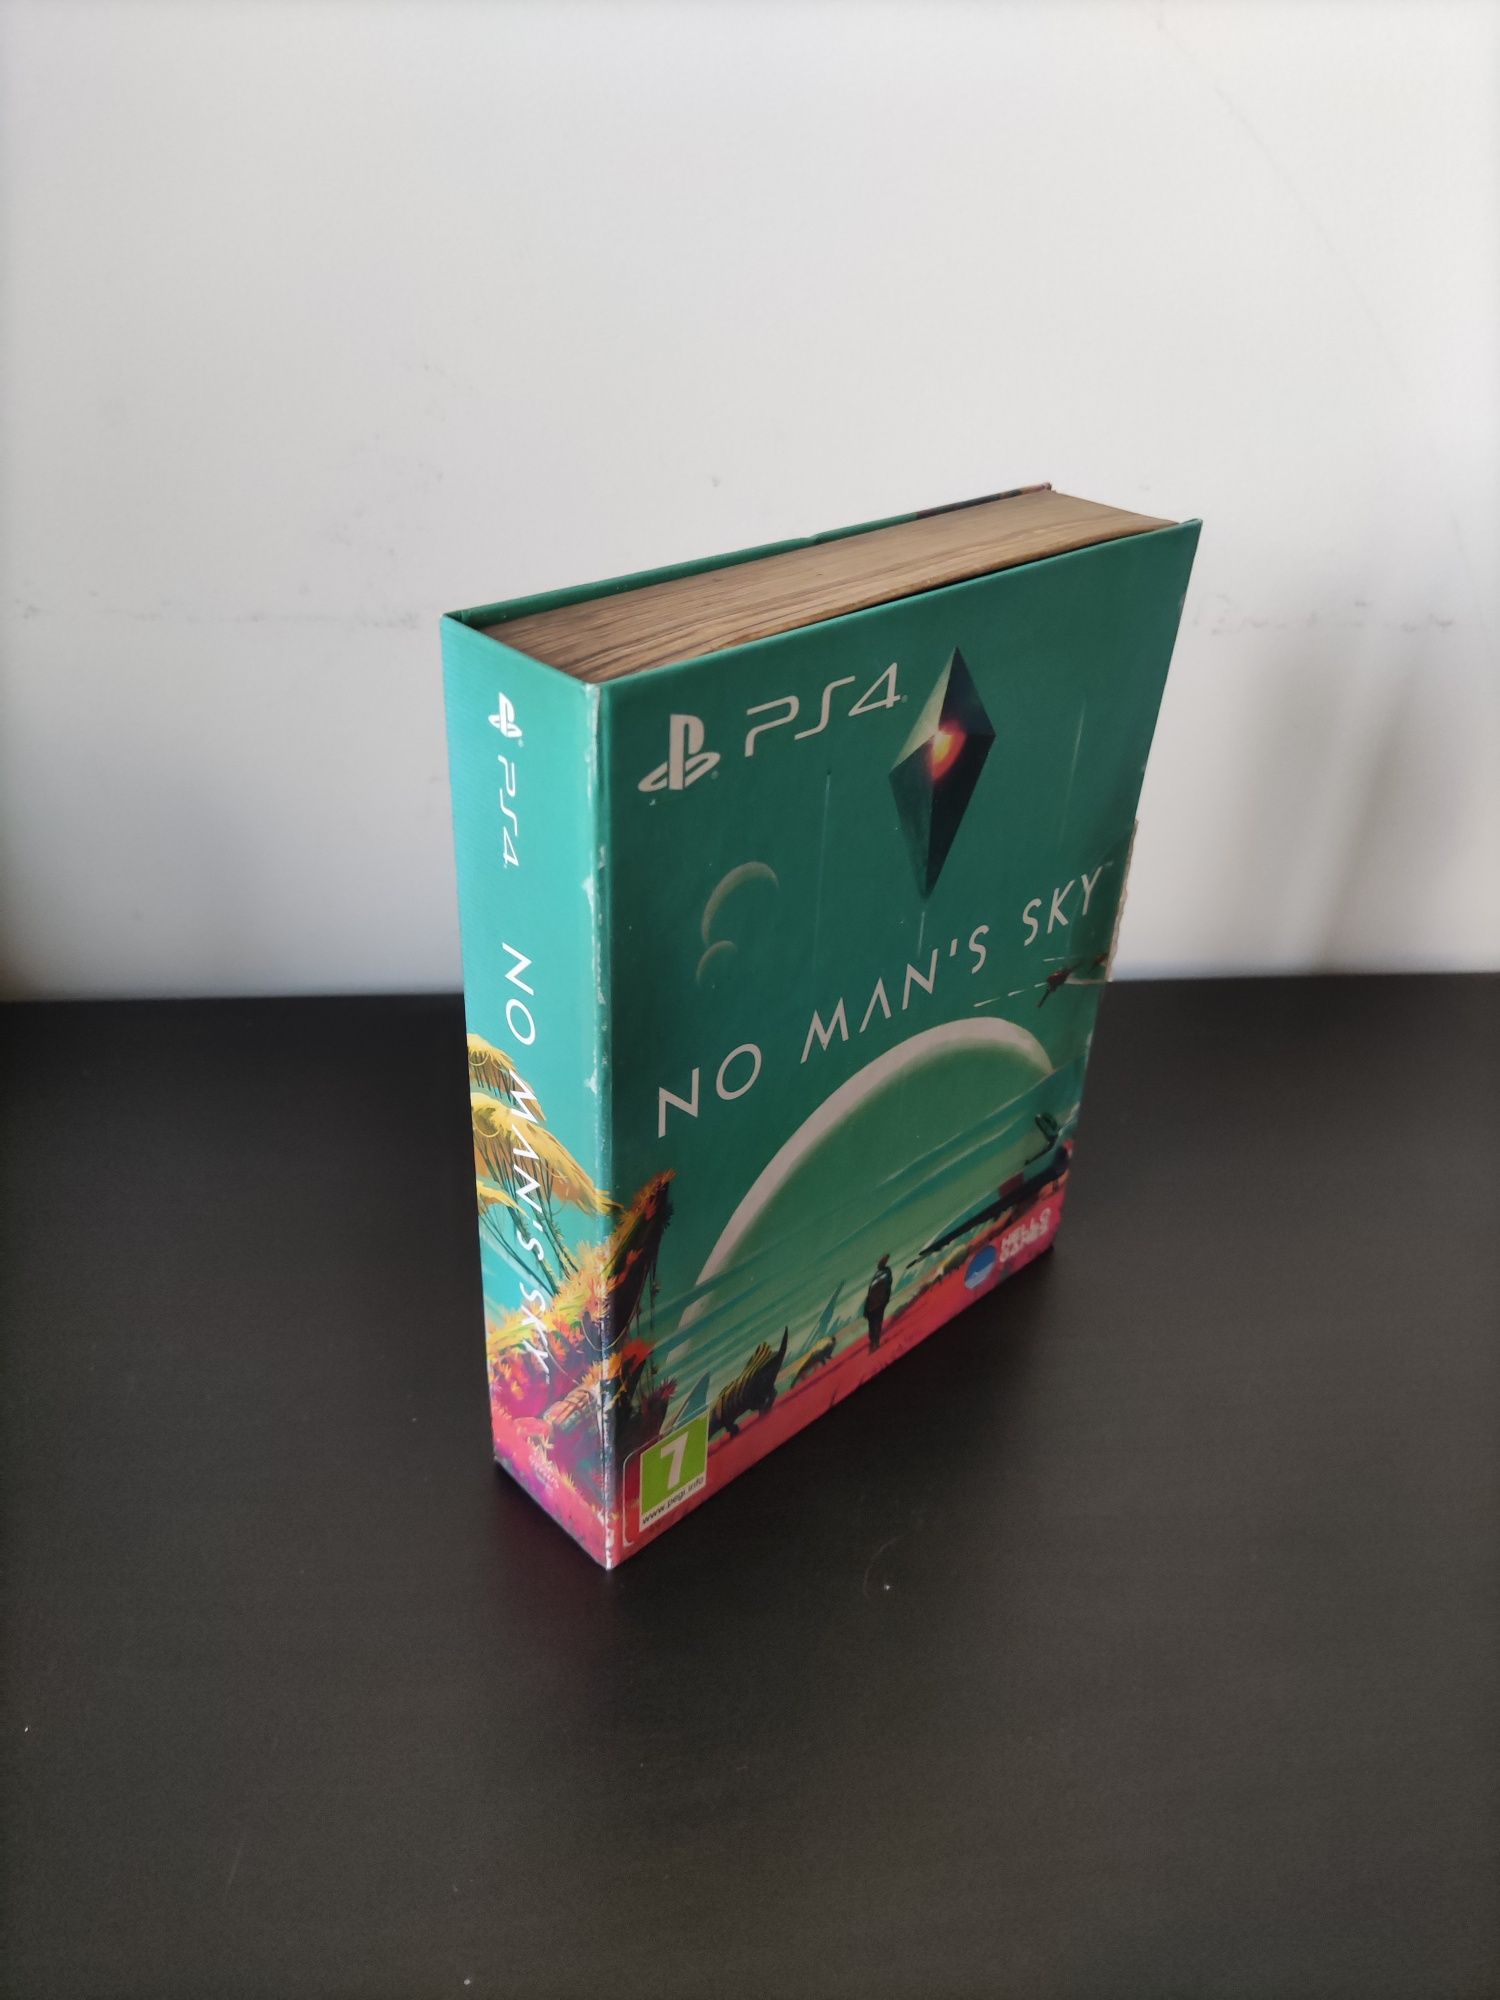 No Man's Sky PS4 Limited Edition